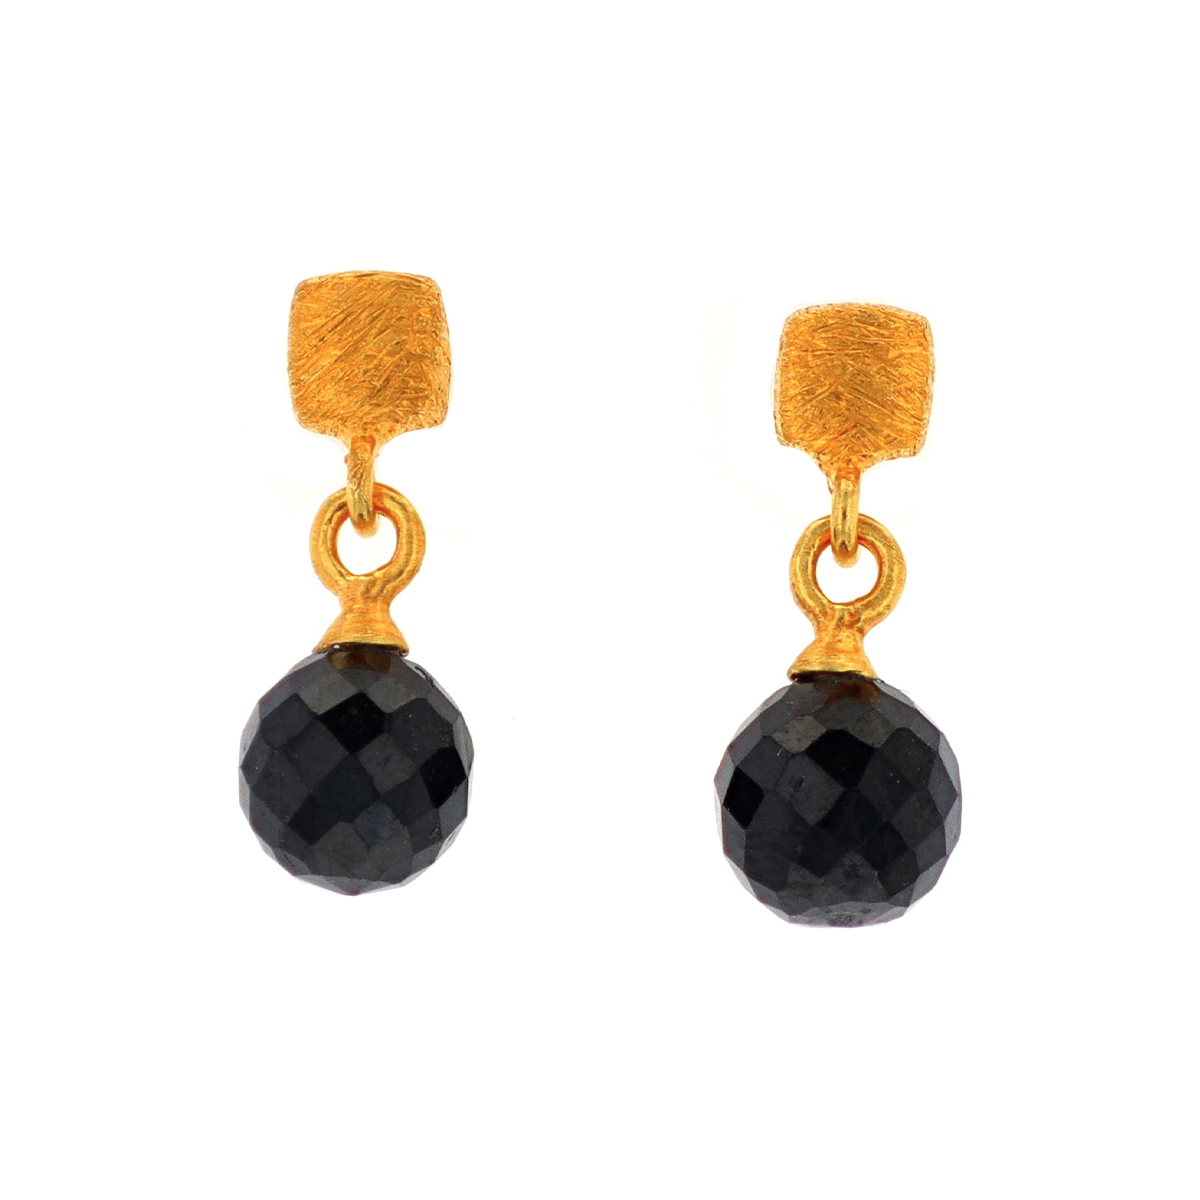 24K Gold Plated Sterling Silver Round Spinel Cube Earrings